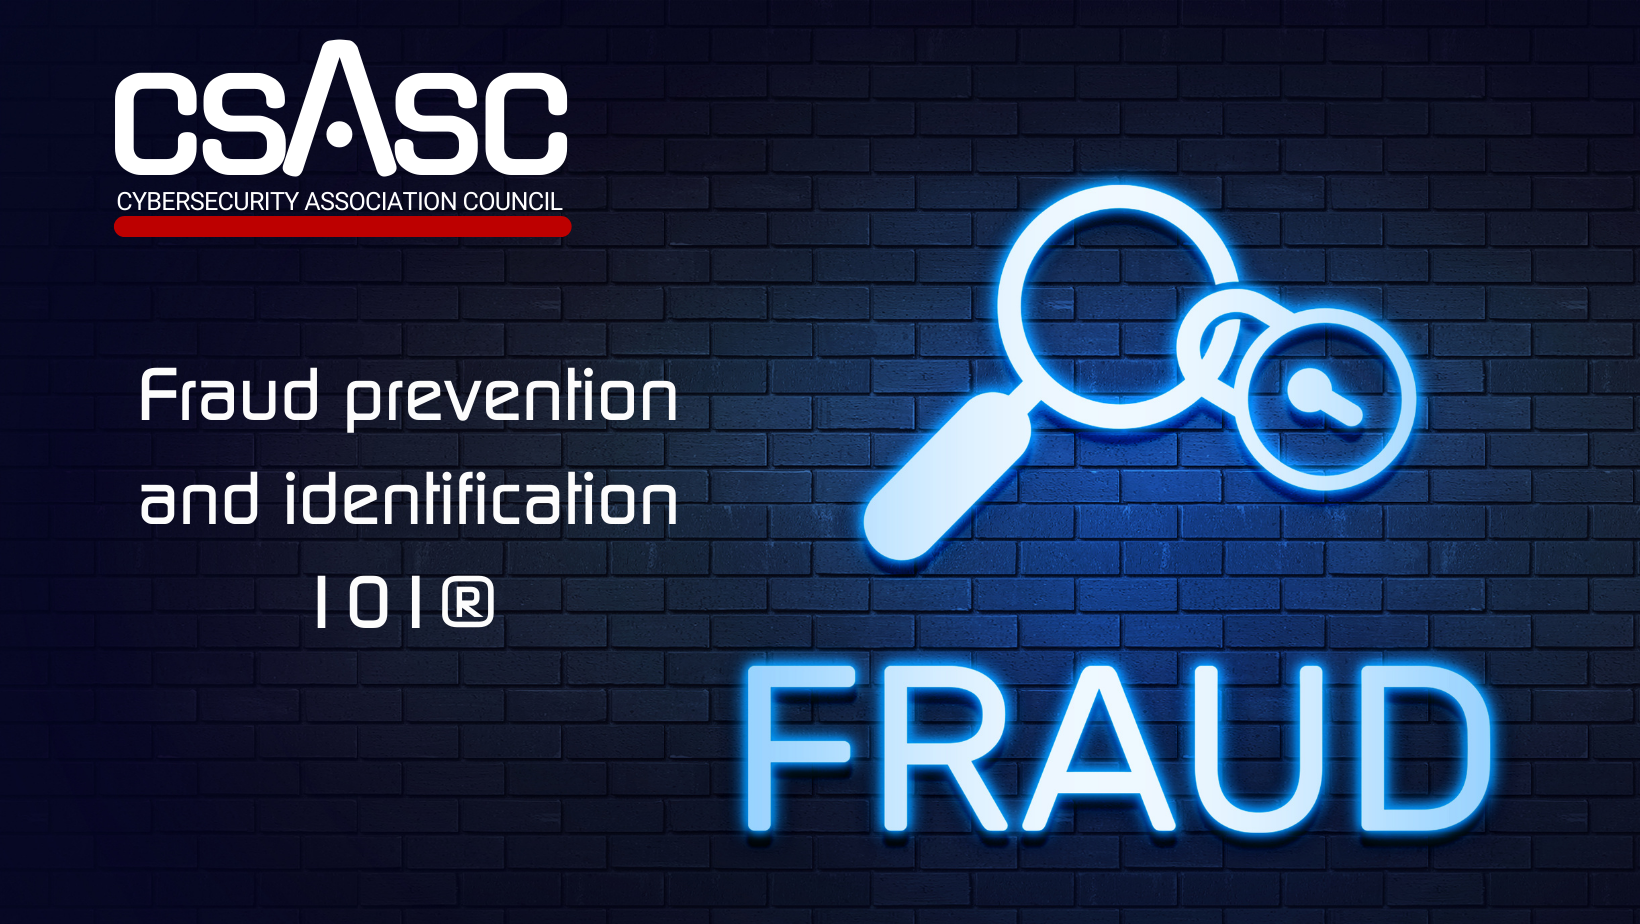 Fraud prevention and identification 101®